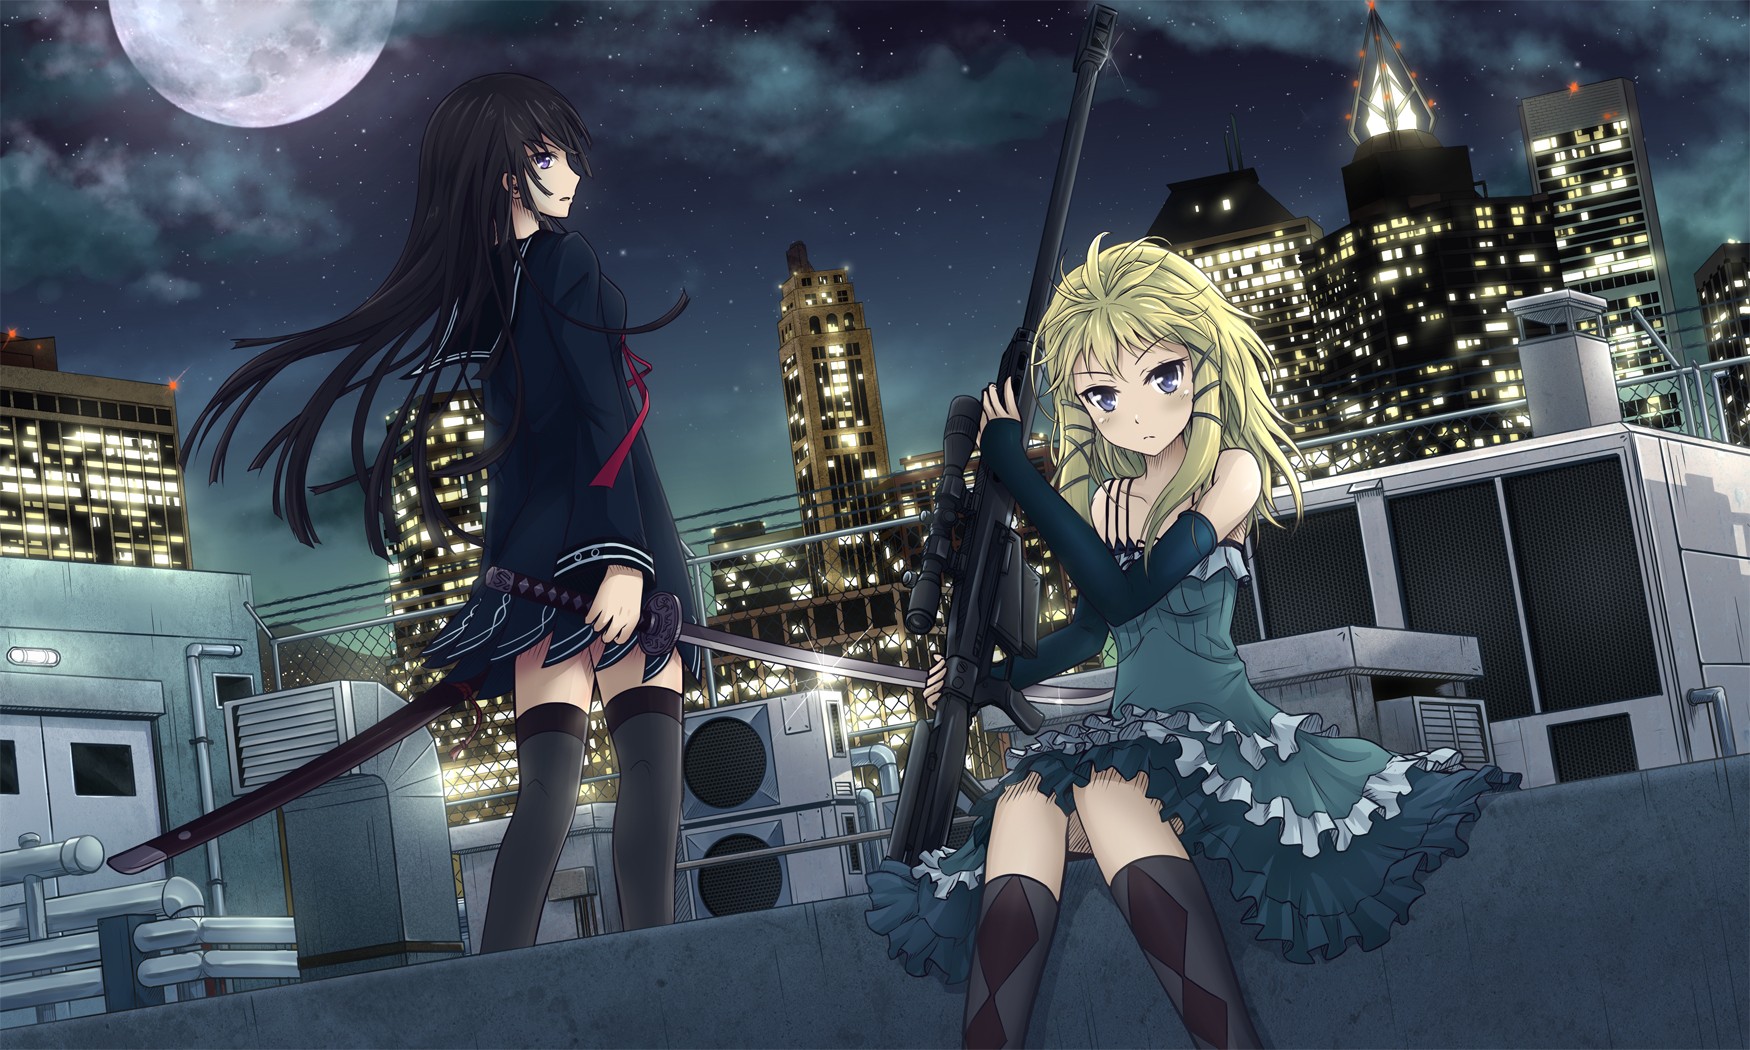 Anime 1750x1050 Black Bullet Tina Sprout Kisara Tendo  anime girls anime sniper rifle two women Moon rooftops girls with guns women with swords weapon blonde black hair sky stockings knees together standing sitting dress long hair katana rifles